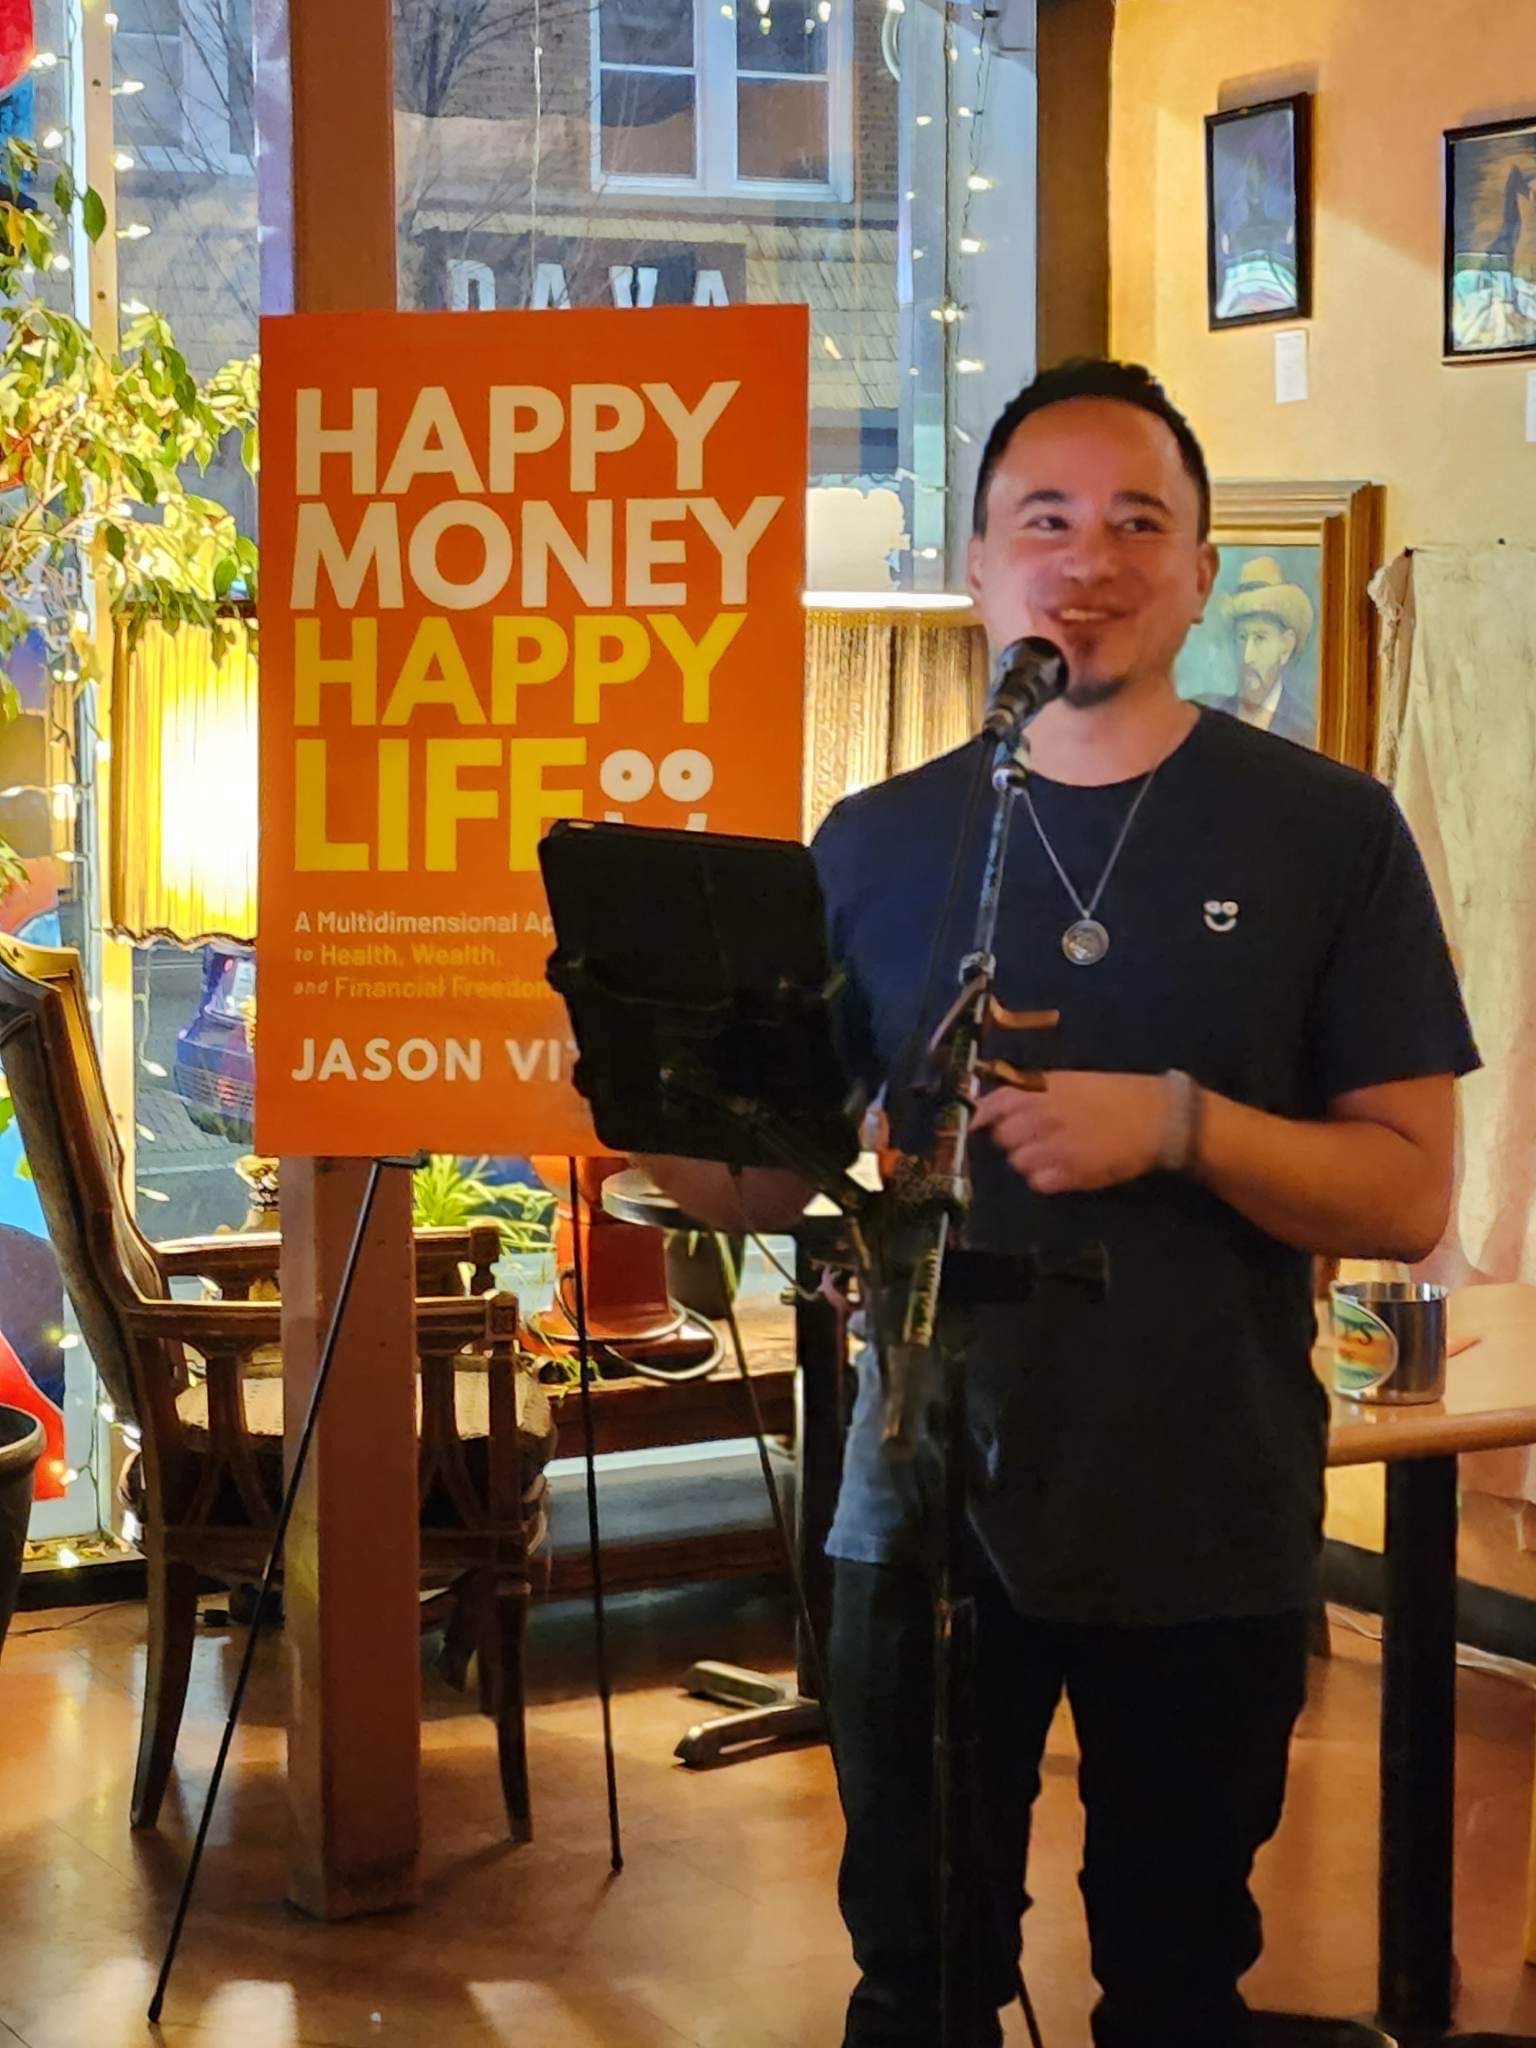 photo of author Jason Vitug reading an excerpt of his book, 'Happy Money Happy Life' which is prominently featured on a poster behind him.